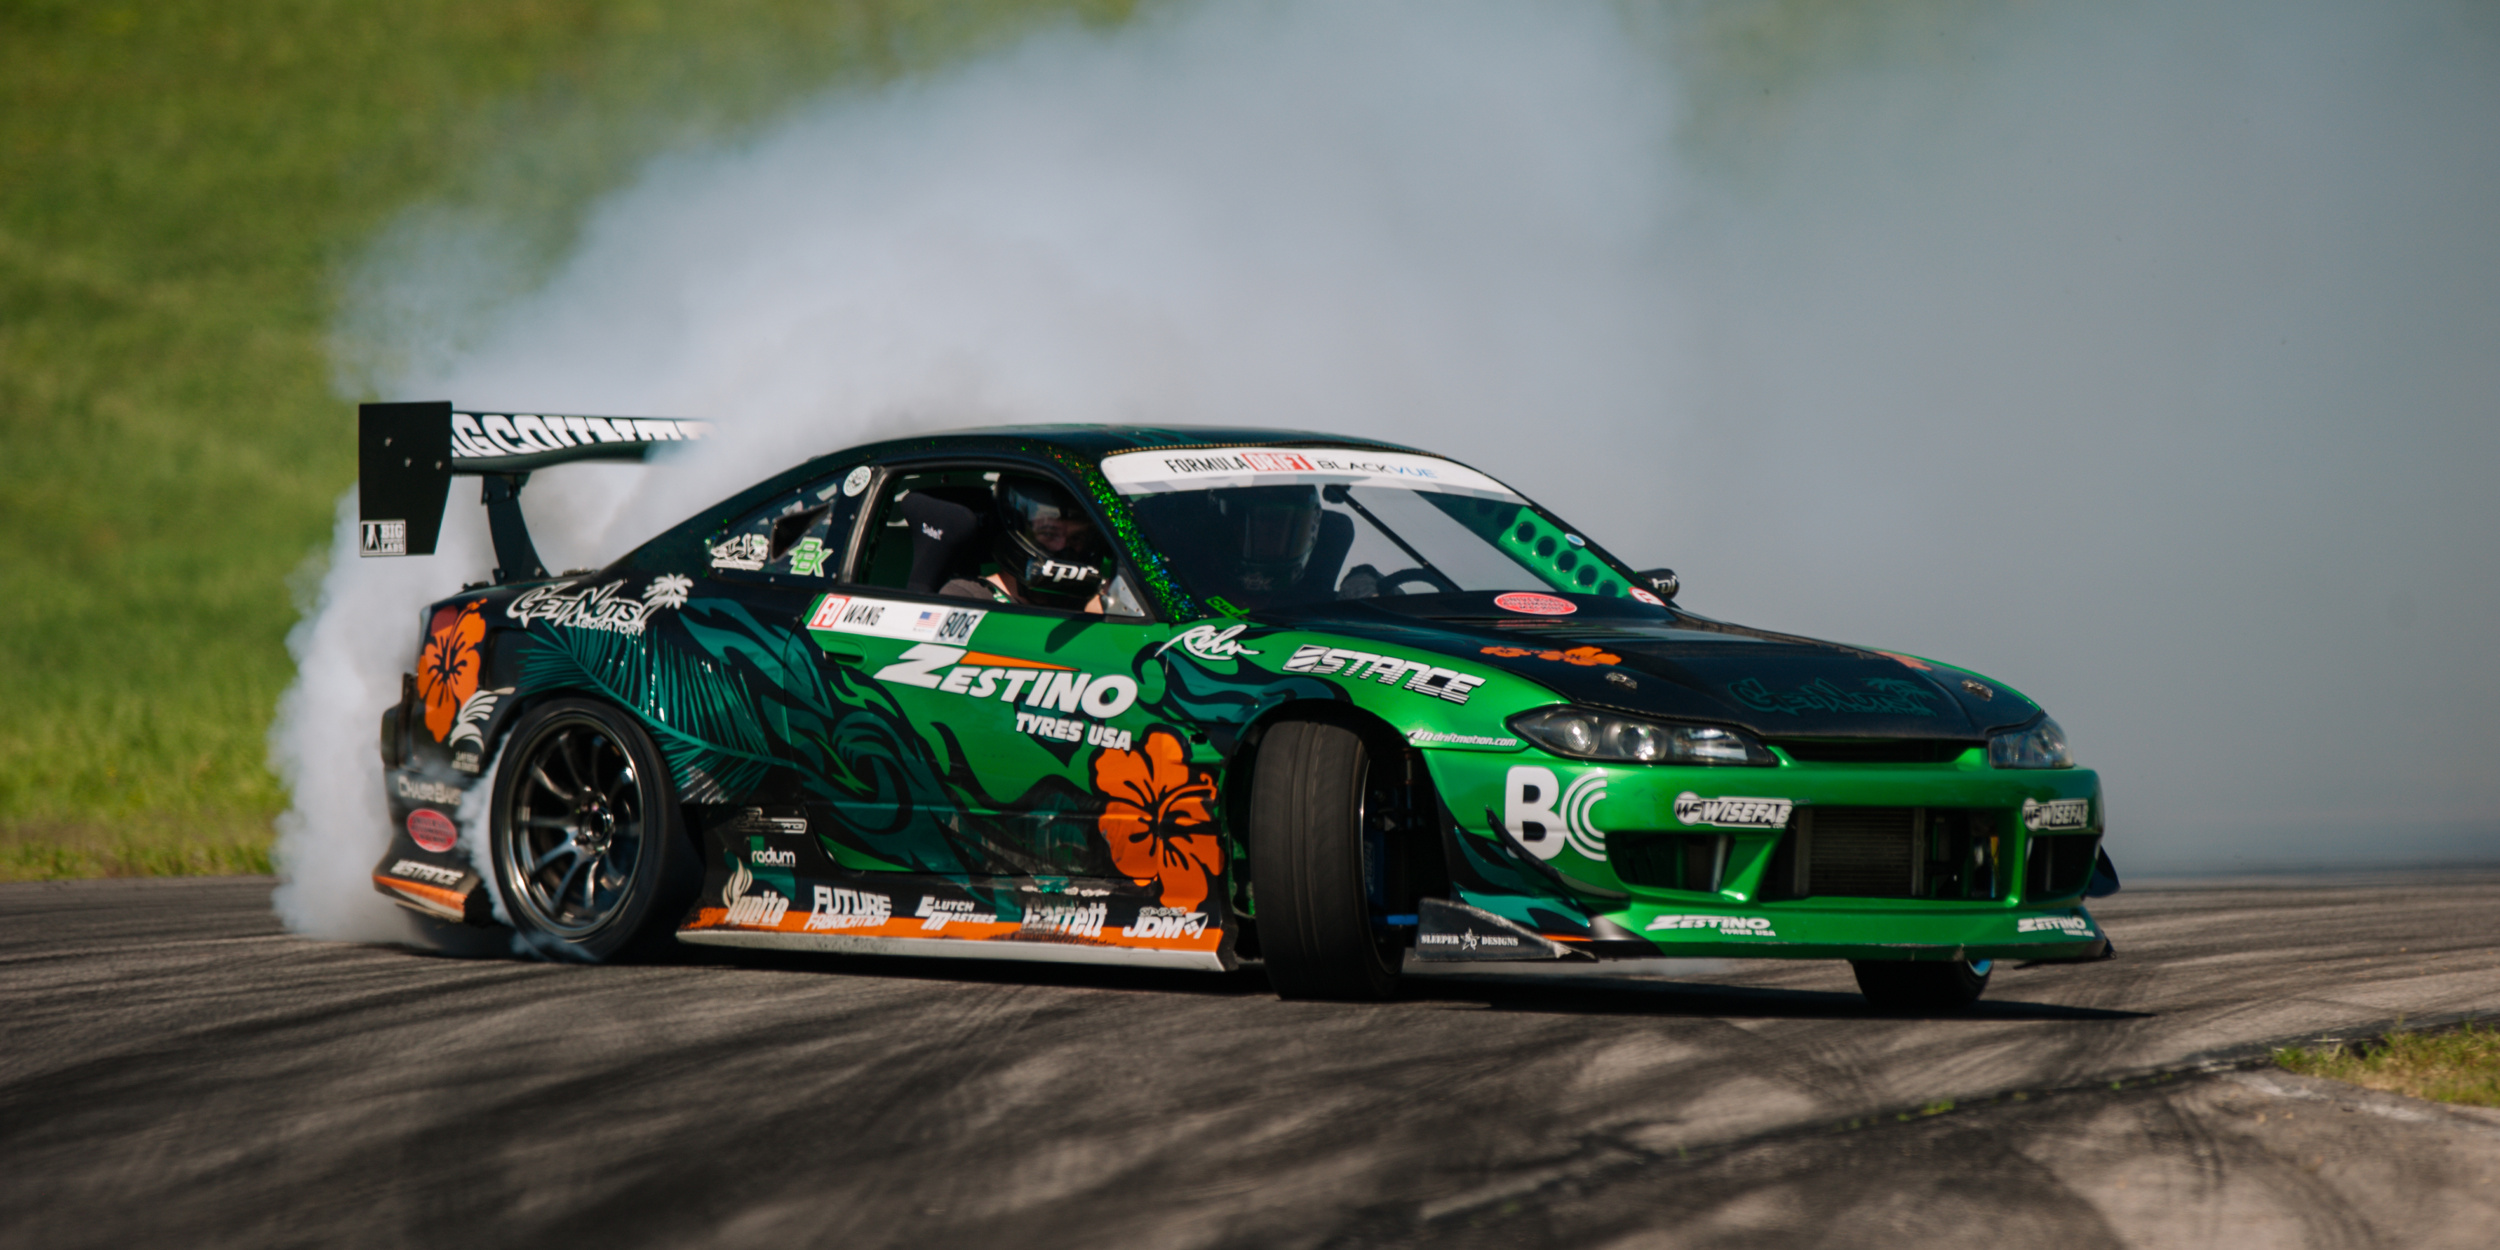 Drifting: Zestino Tyres, Formula-D, Extreme motorsports discipline, Competitive event. 2500x1250 Dual Screen Background.